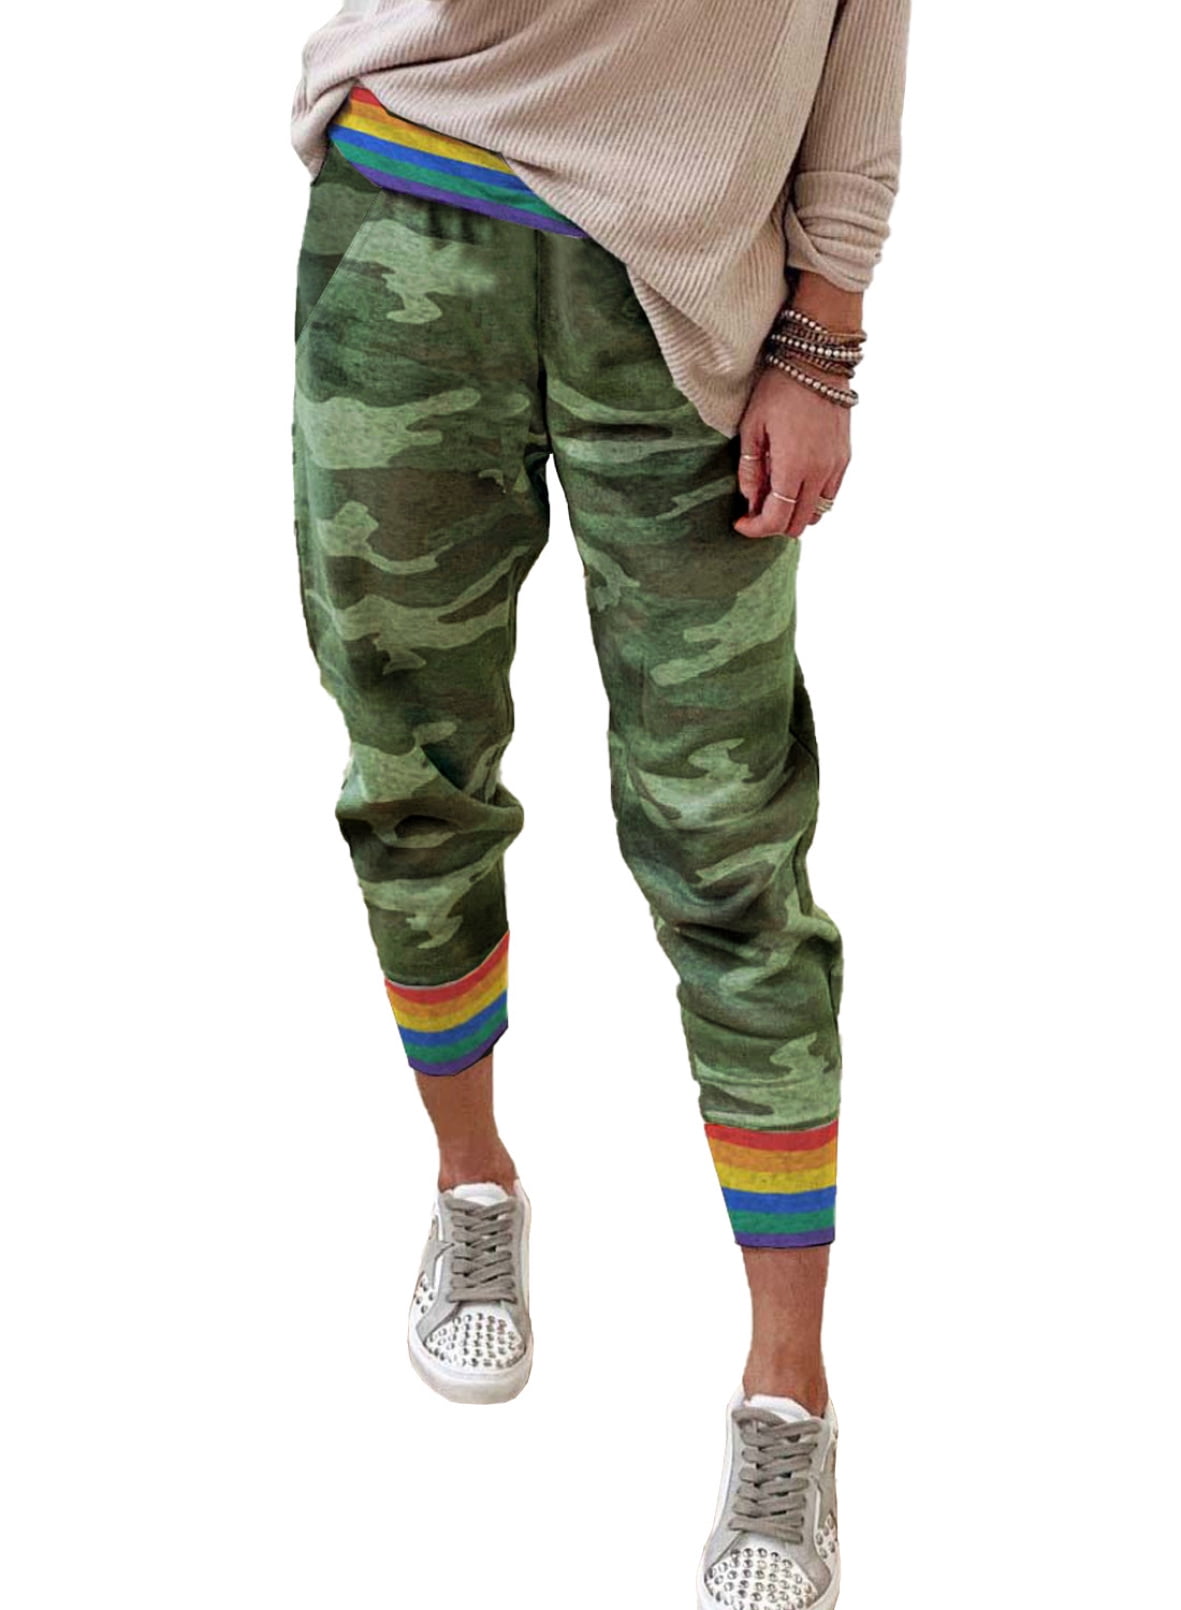 Kids Boys Girls Camouflage Joggers Jogging Pants Loose Casual Boho Trousers 